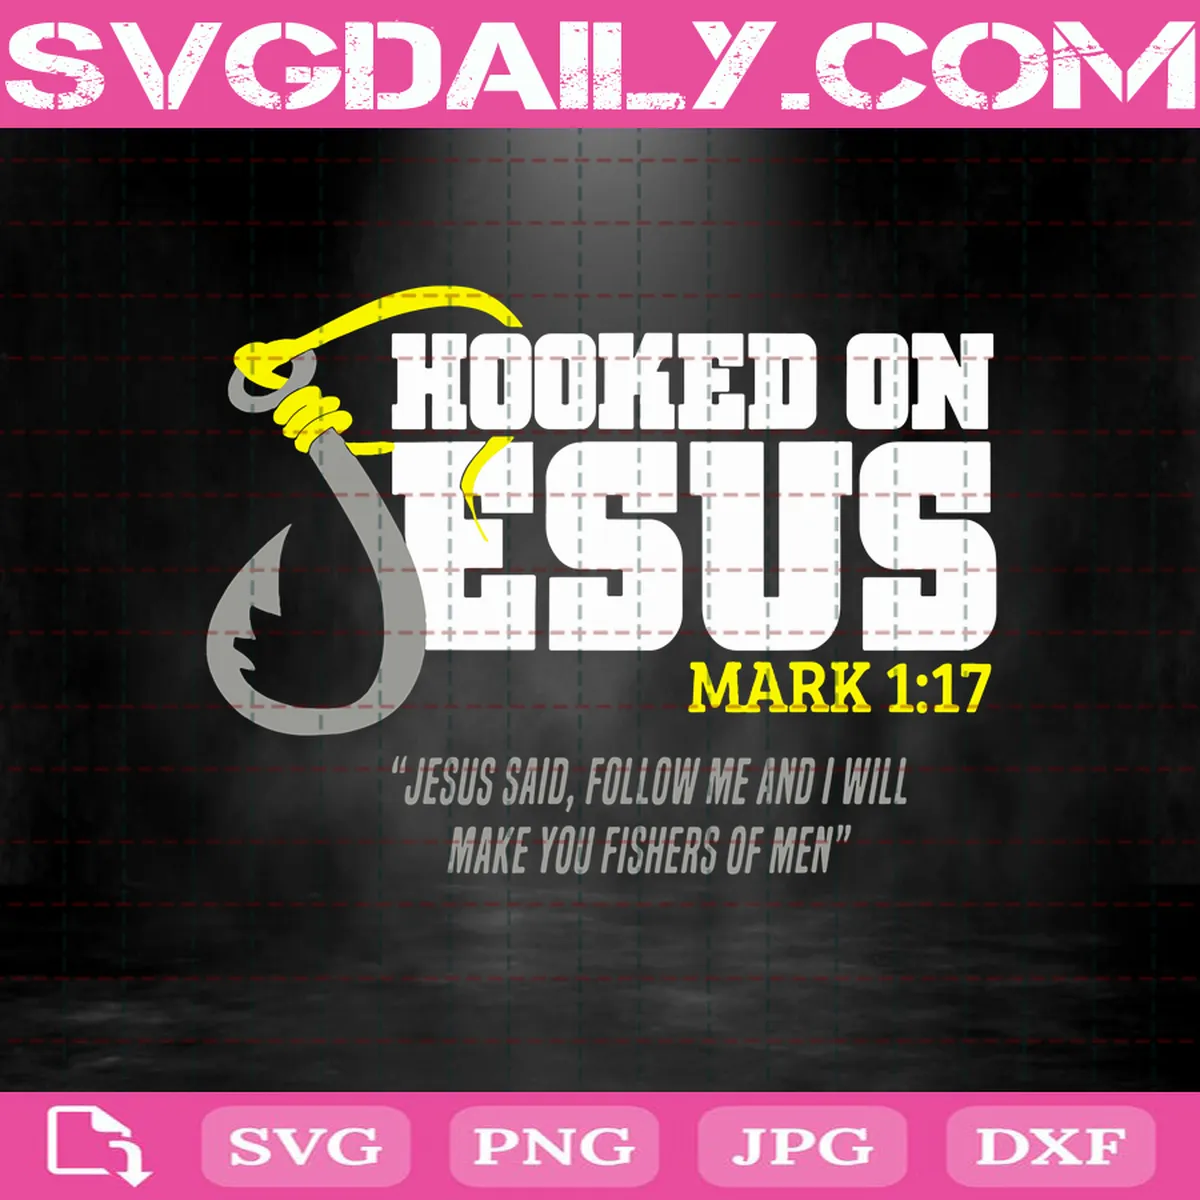 Hooked On Jesus Svg, Jesus Said Follow Me And I Will Make You Fishers Of Man Svg, The Church Of Jesus Christ Layered Svg, Svg Eps Png Dxf